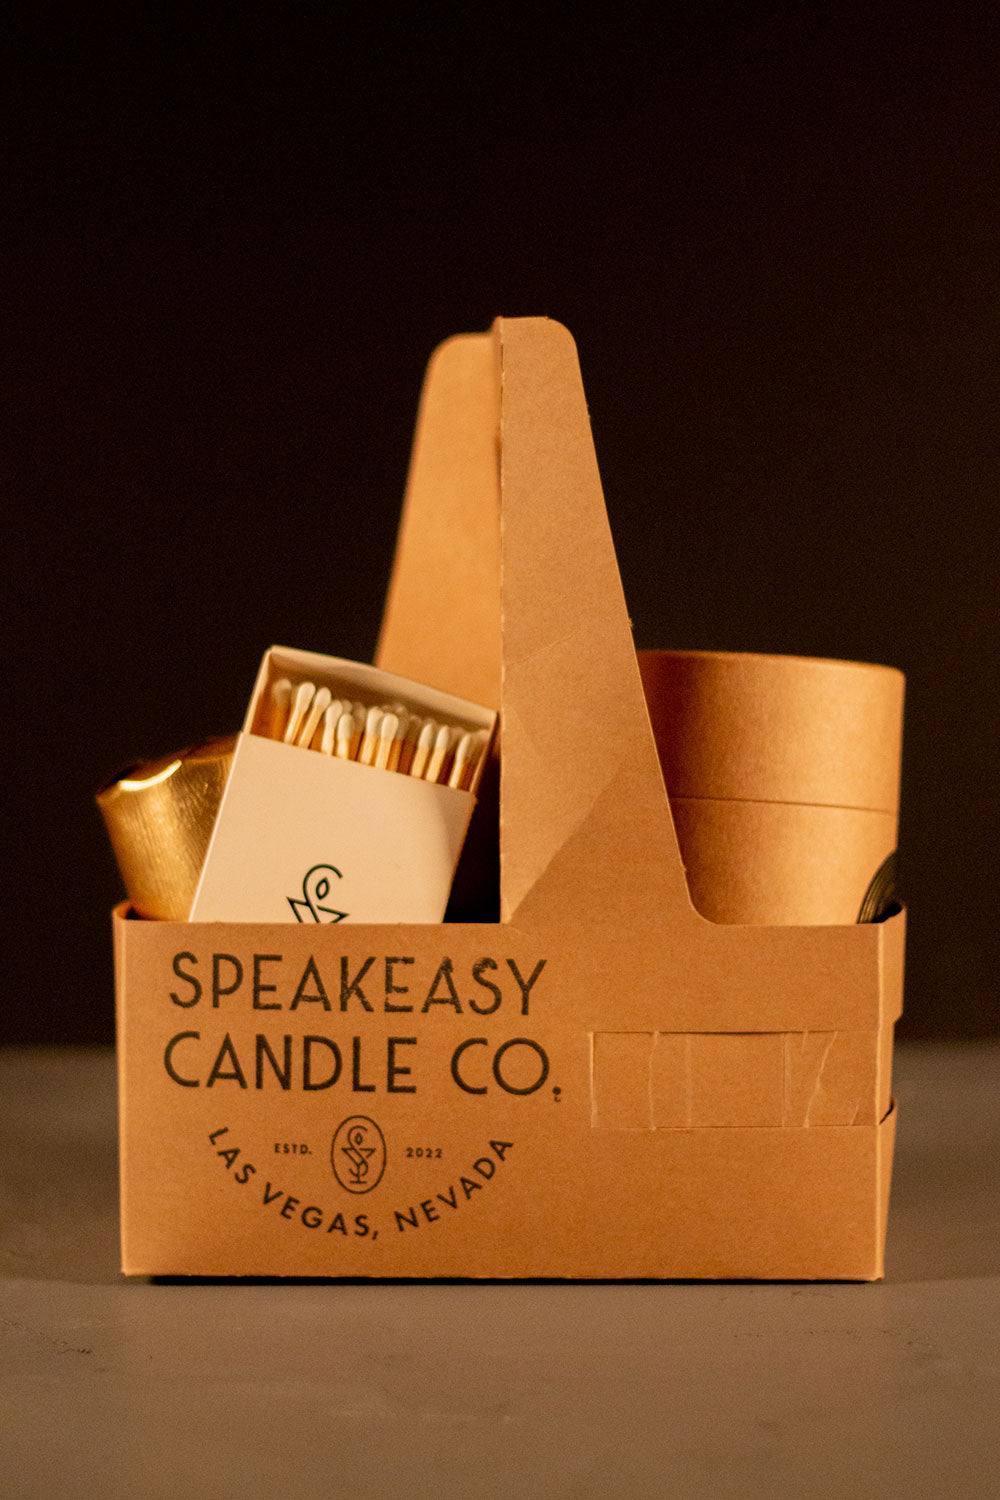 Top Shelf Gift Set (2 candles and matches)